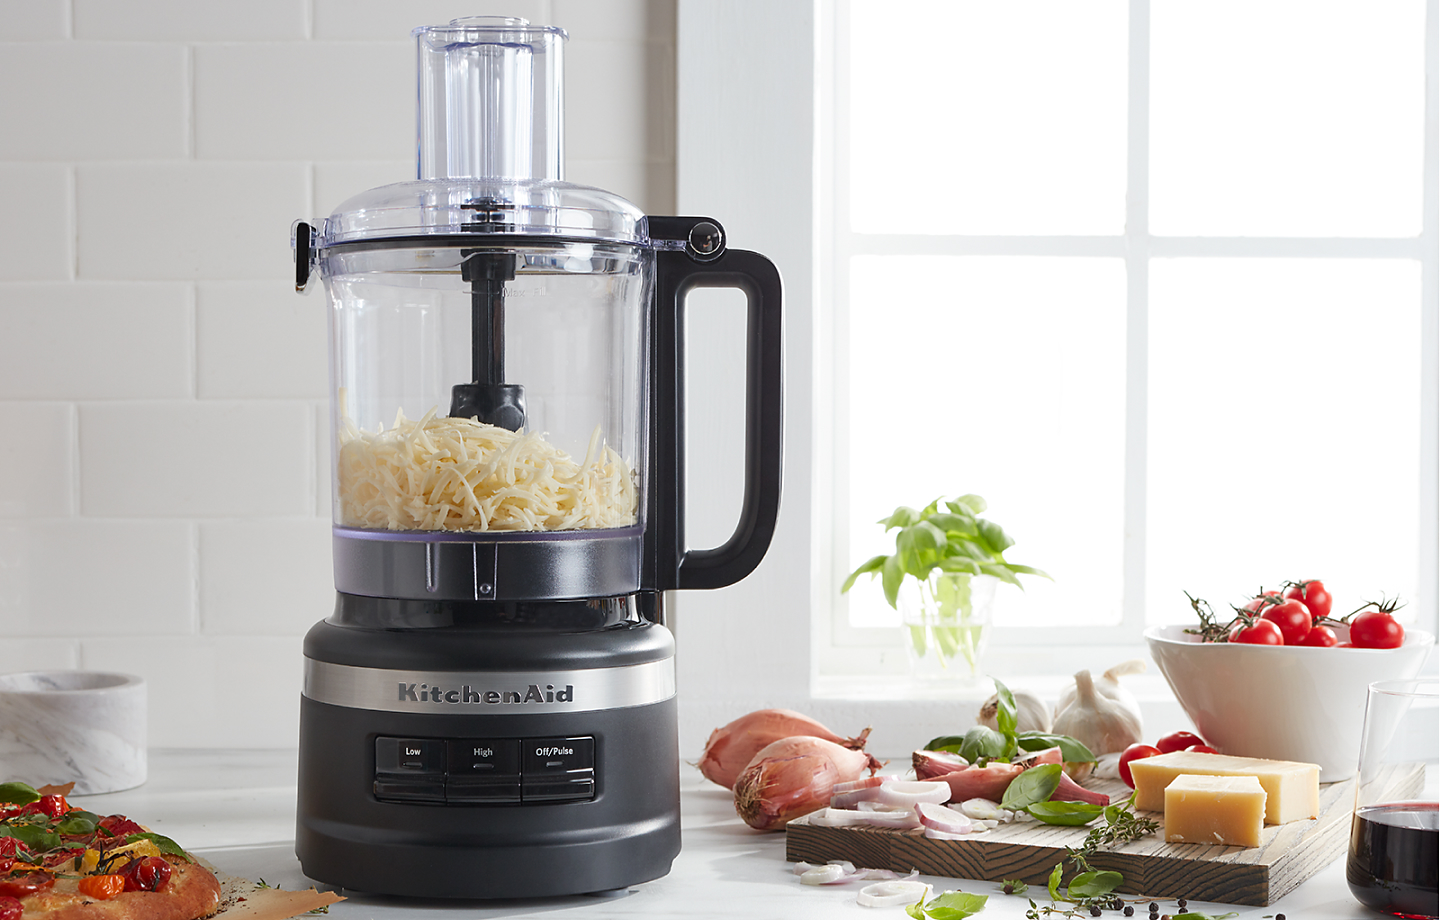 https://kitchenaid-h.assetsadobe.com/is/image/content/dam/business-unit/kitchenaid/en-us/marketing-content/site-assets/page-content/blog/how-to-grate-cheese-in-a-food-processor/Ihow-to-grate-cheese_3-Desktop.jpg?fmt=png-alpha&qlt=85,0&resMode=sharp2&op_usm=1.75,0.3,2,0&scl=1&constrain=fit,1